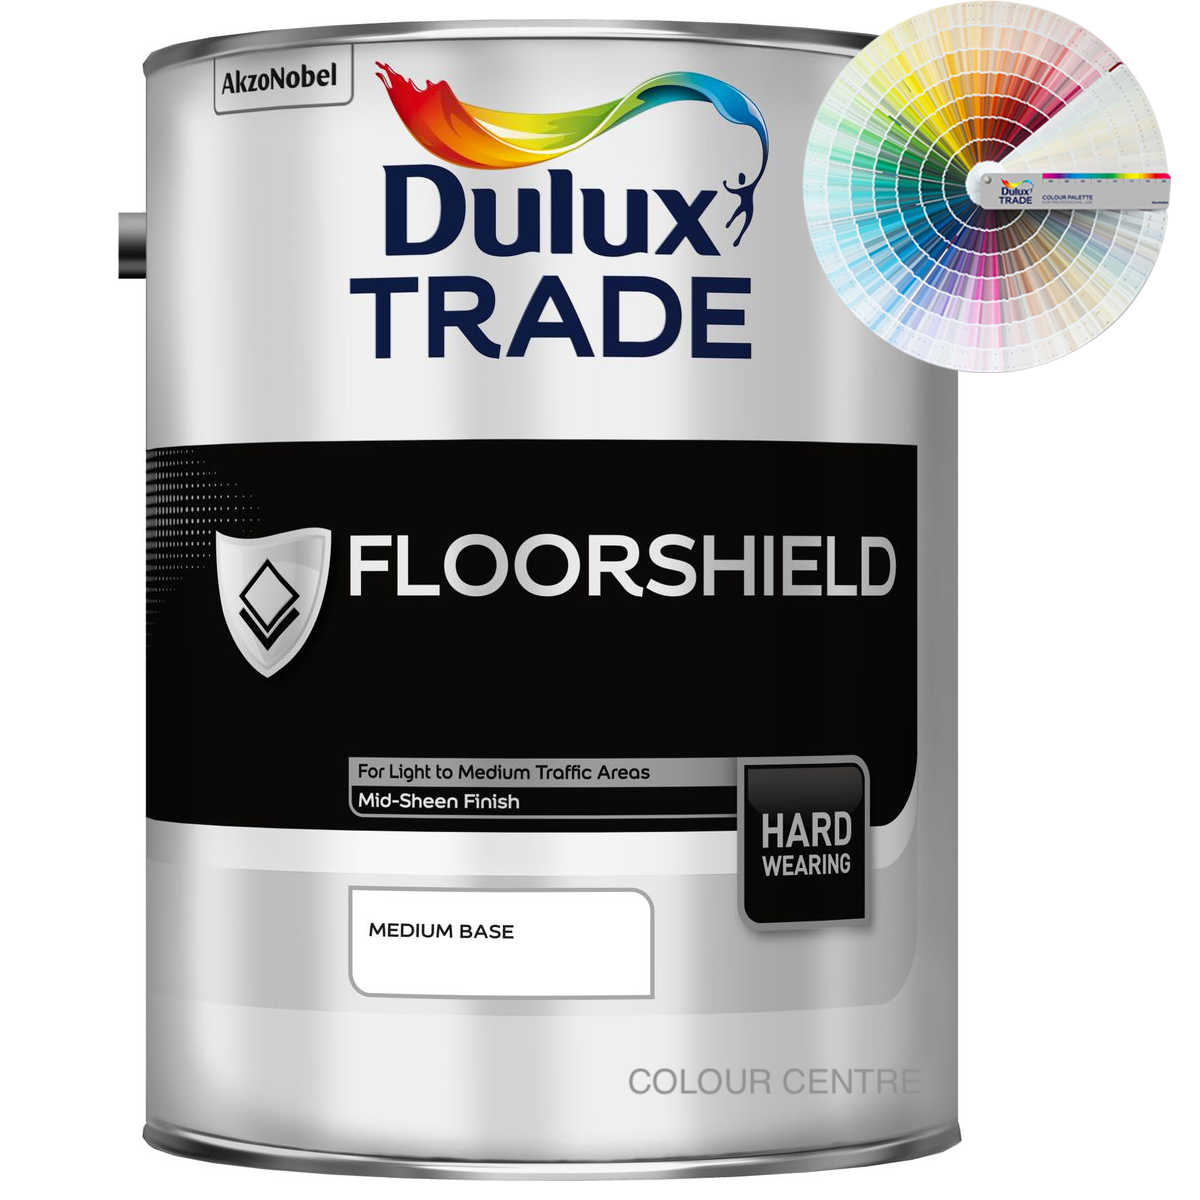 Dulux Trade Floorshield Tinted Colour 5L